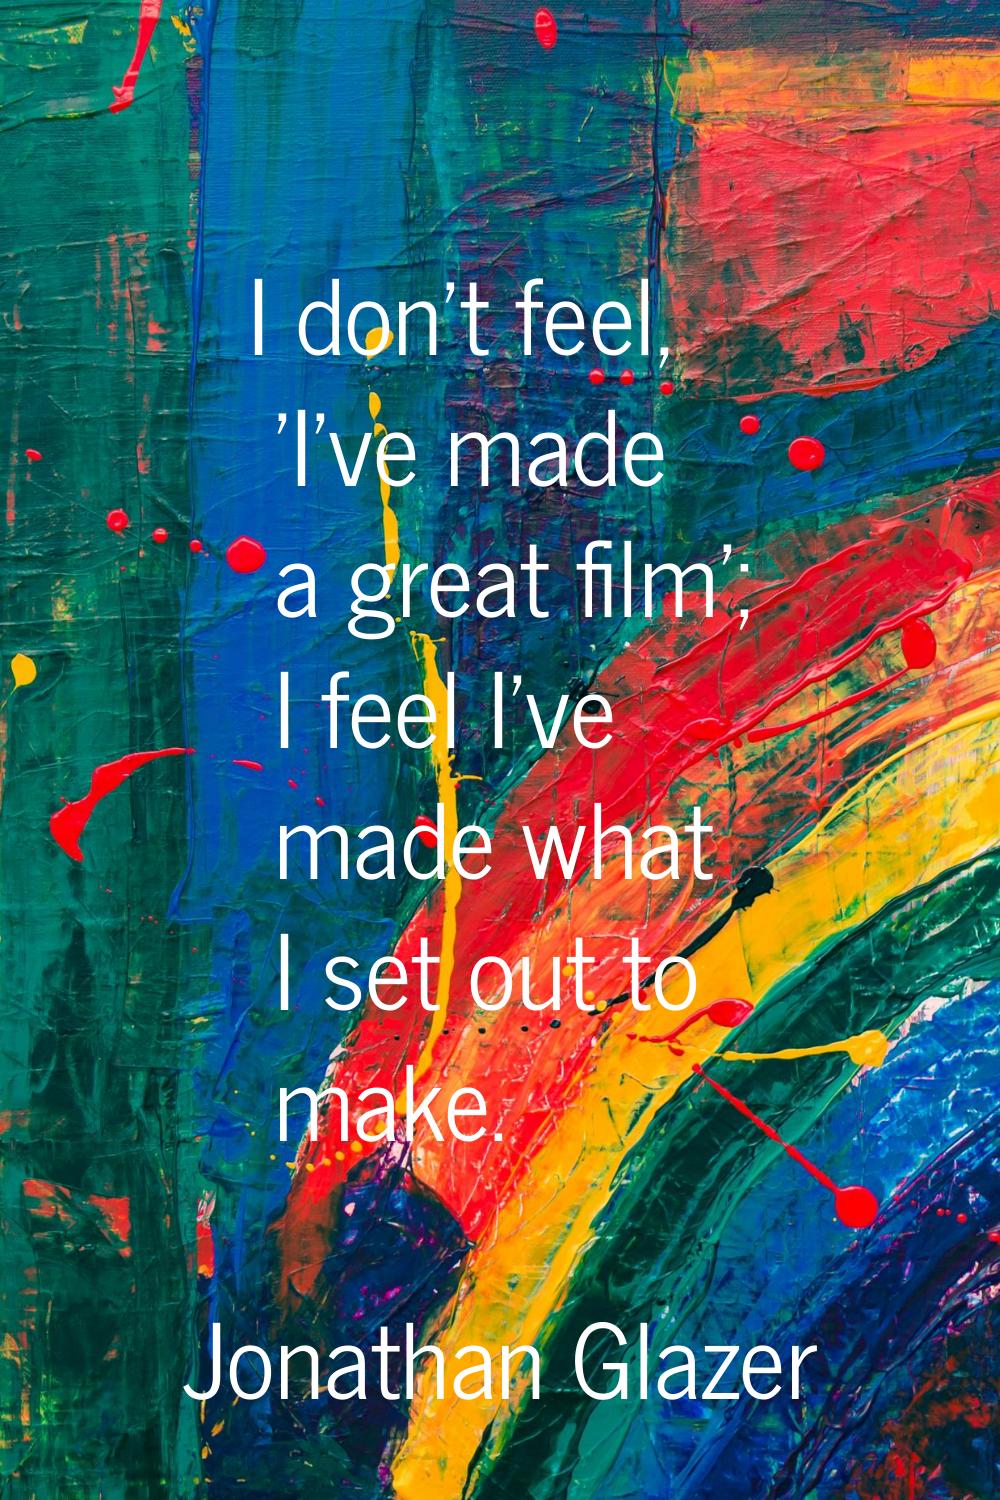 I don't feel, 'I've made a great film'; I feel I've made what I set out to make.